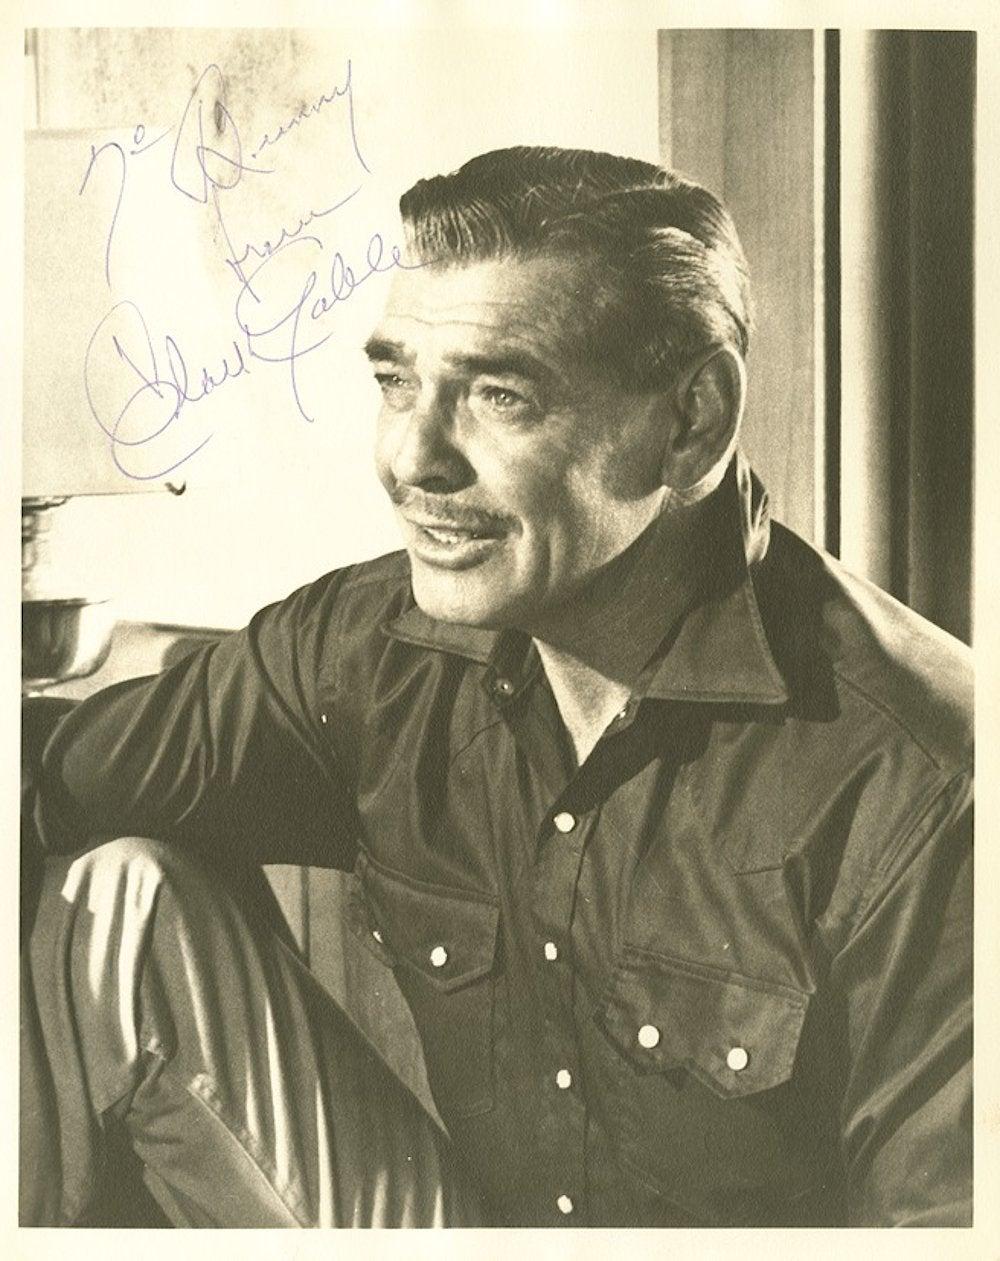 Paper Clark Gable Signed Photograph Black and White circa 1930s / 1940s